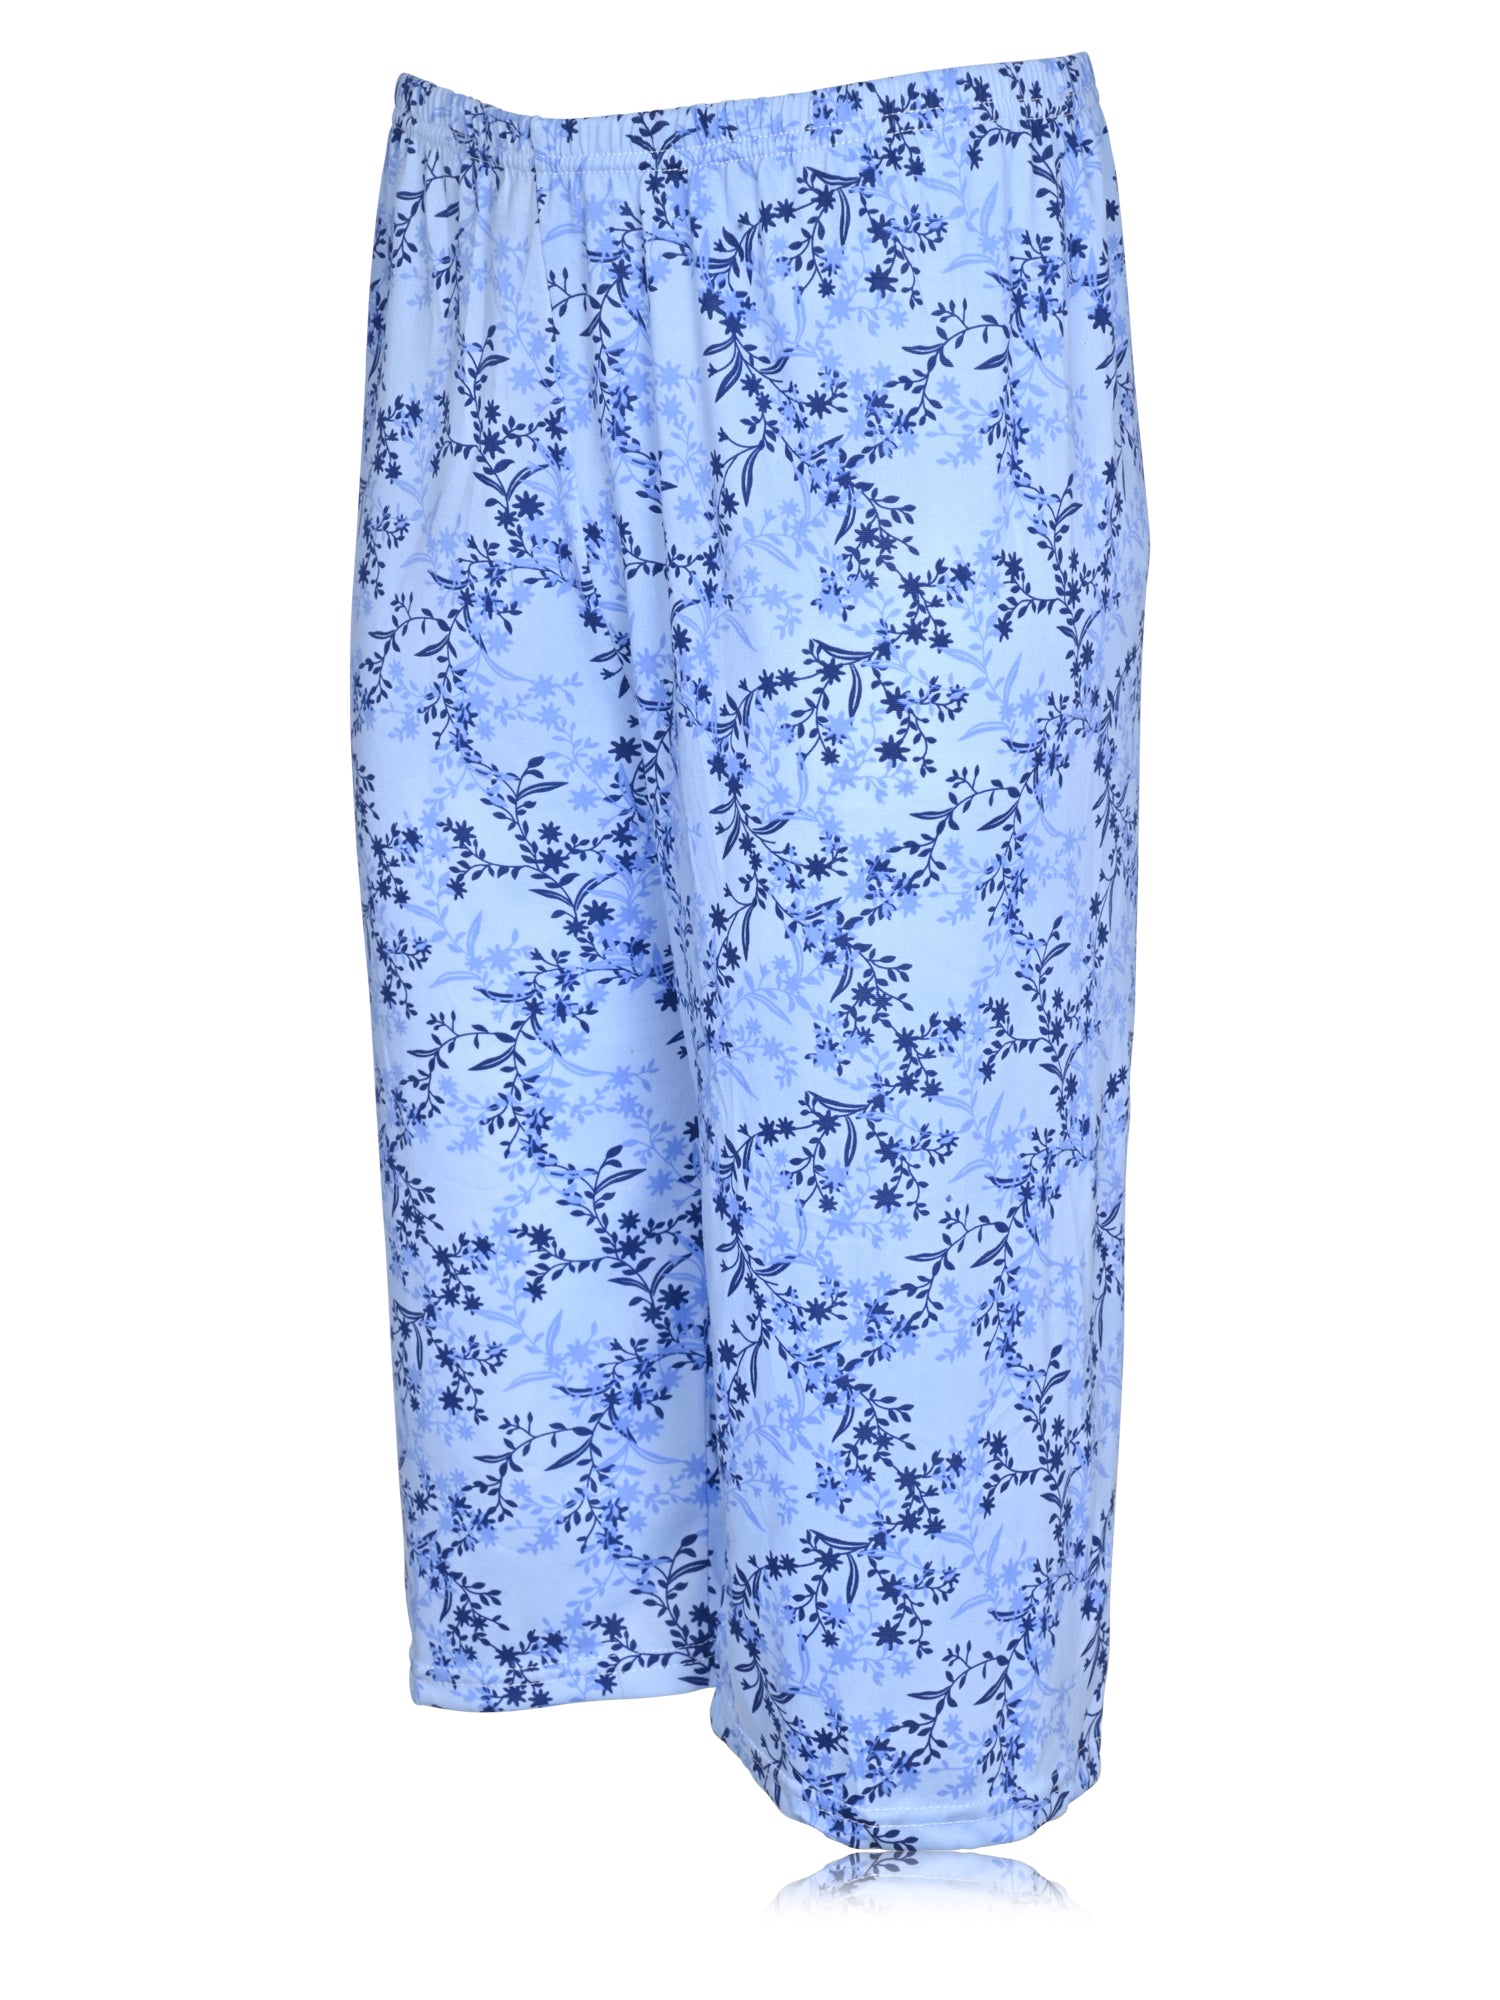 Super Soft Blue Paisley Short Sleeve Capri Pyjama Set - For Her from The  Luxe Company UK